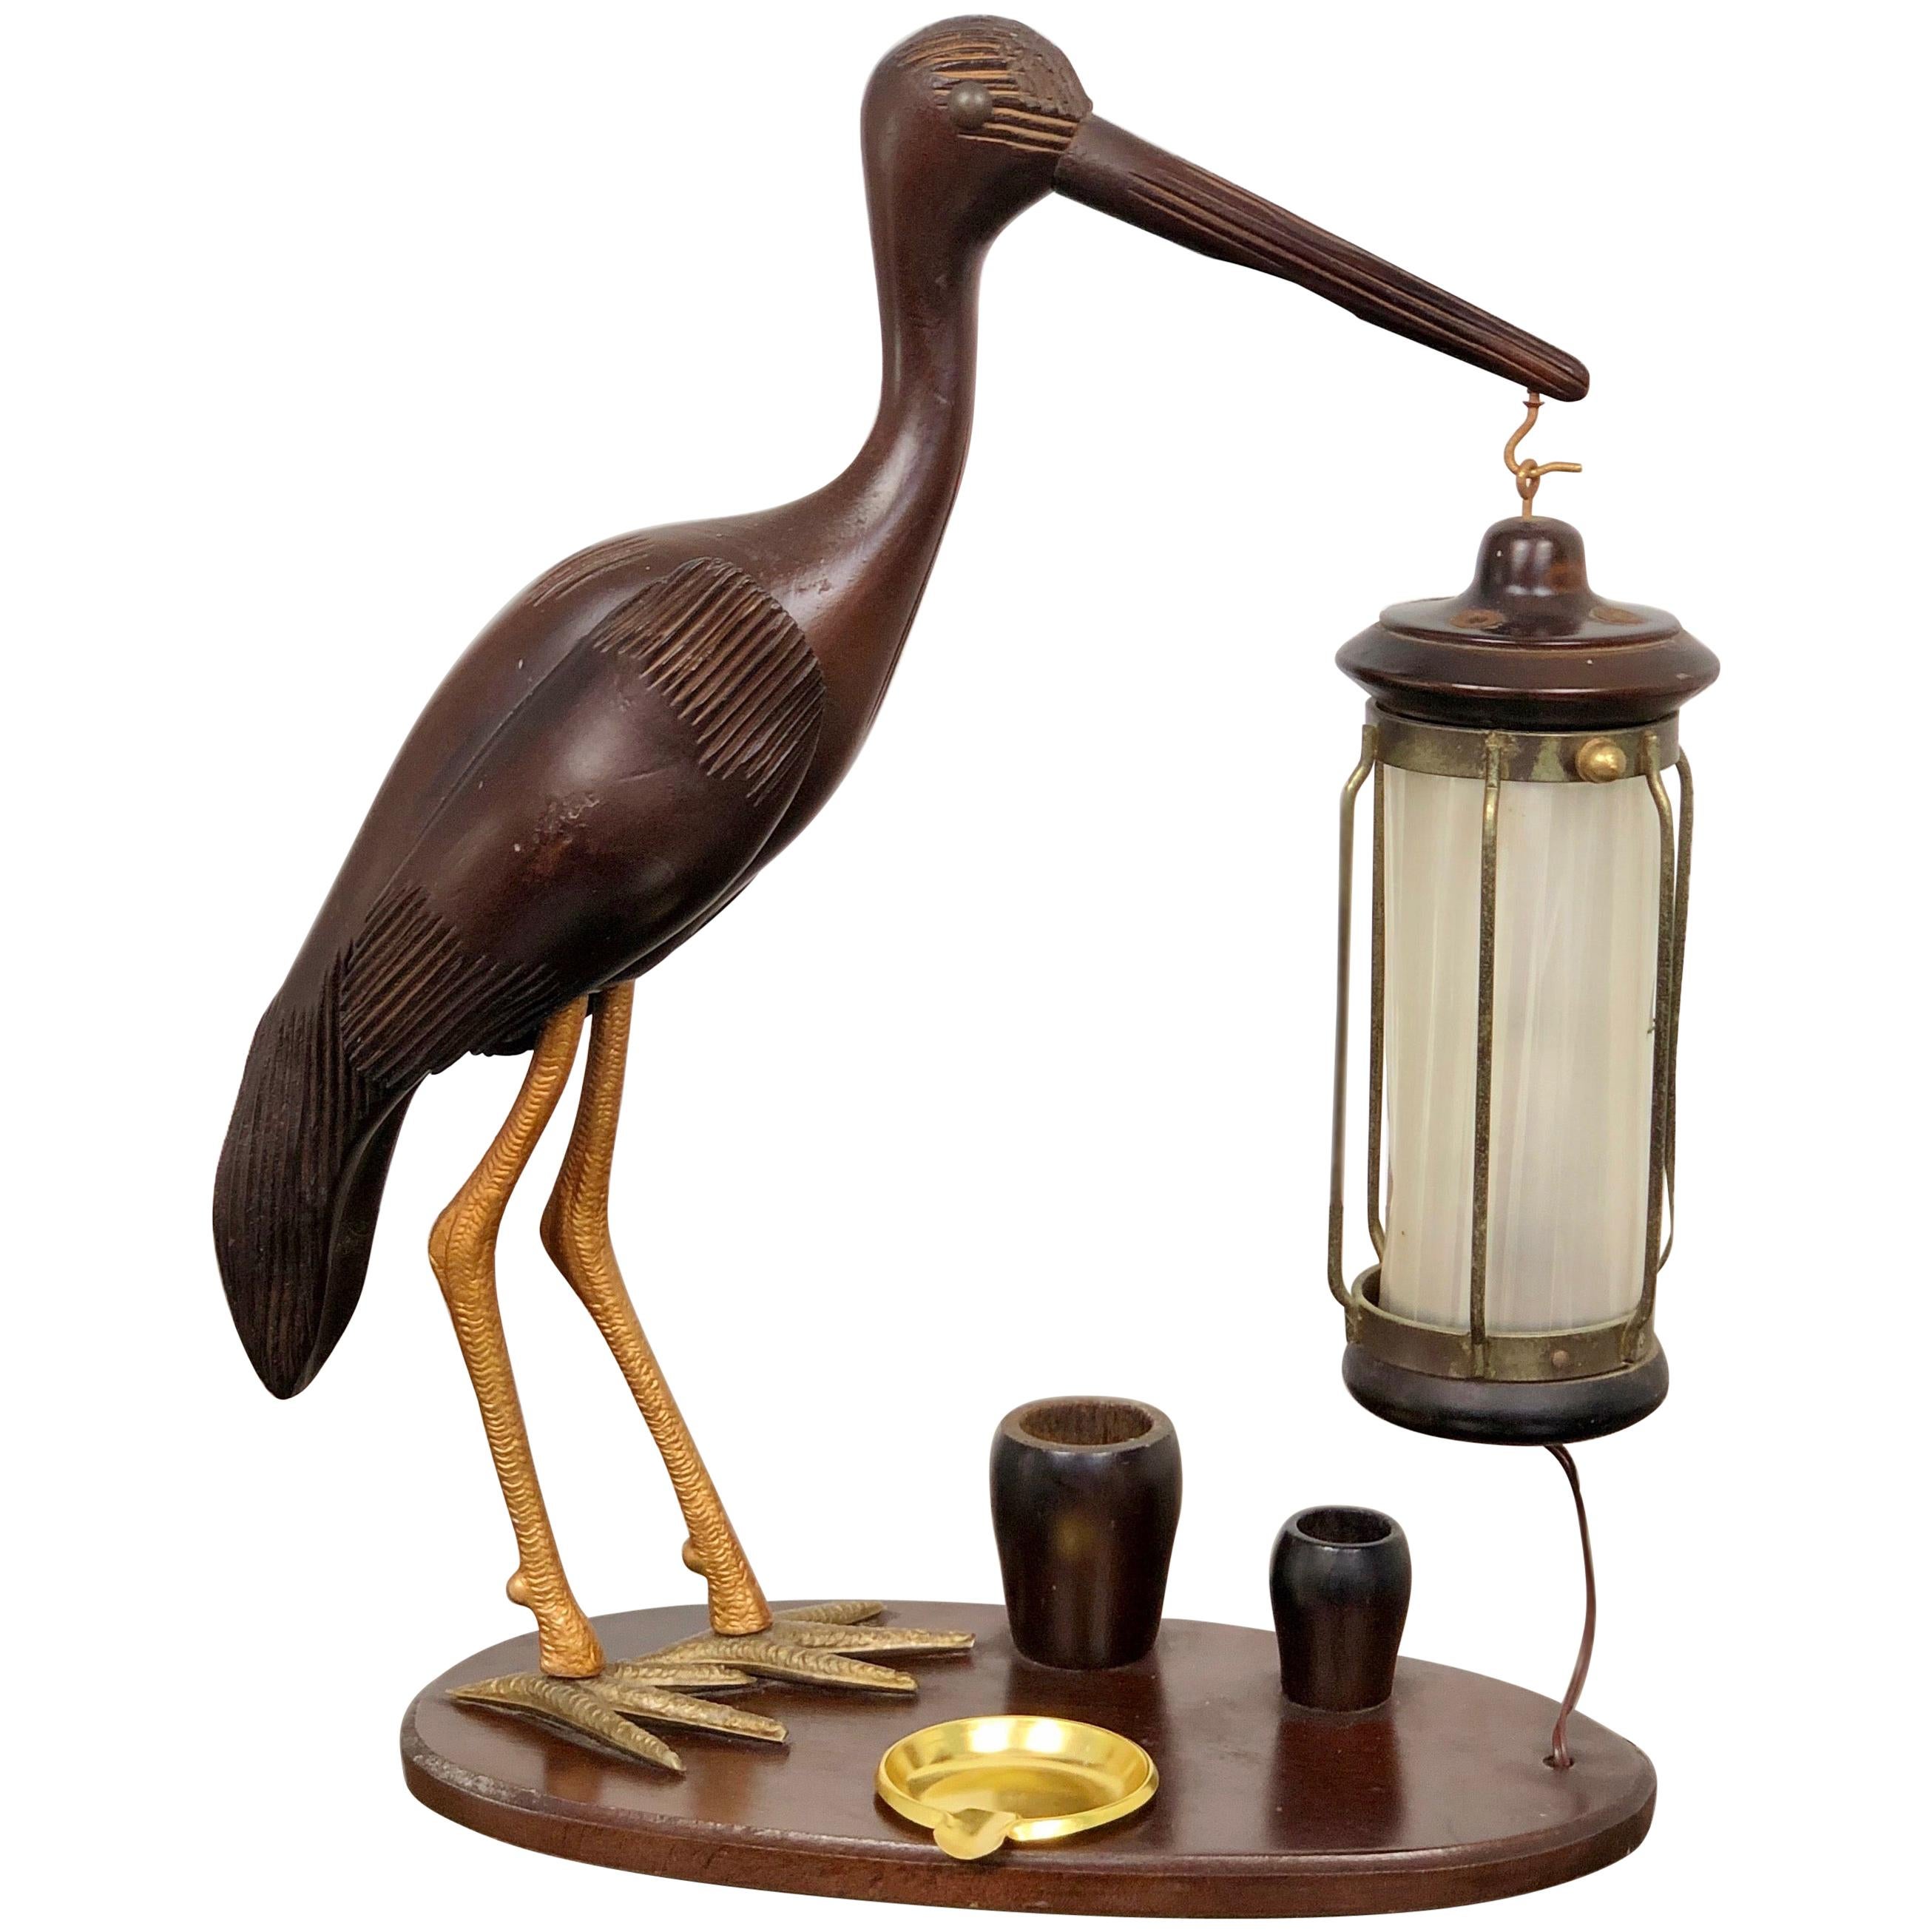 1940s Art Deco Heron Table Lamp Ashtray Cigarette Service Italy Hand Carved Wood